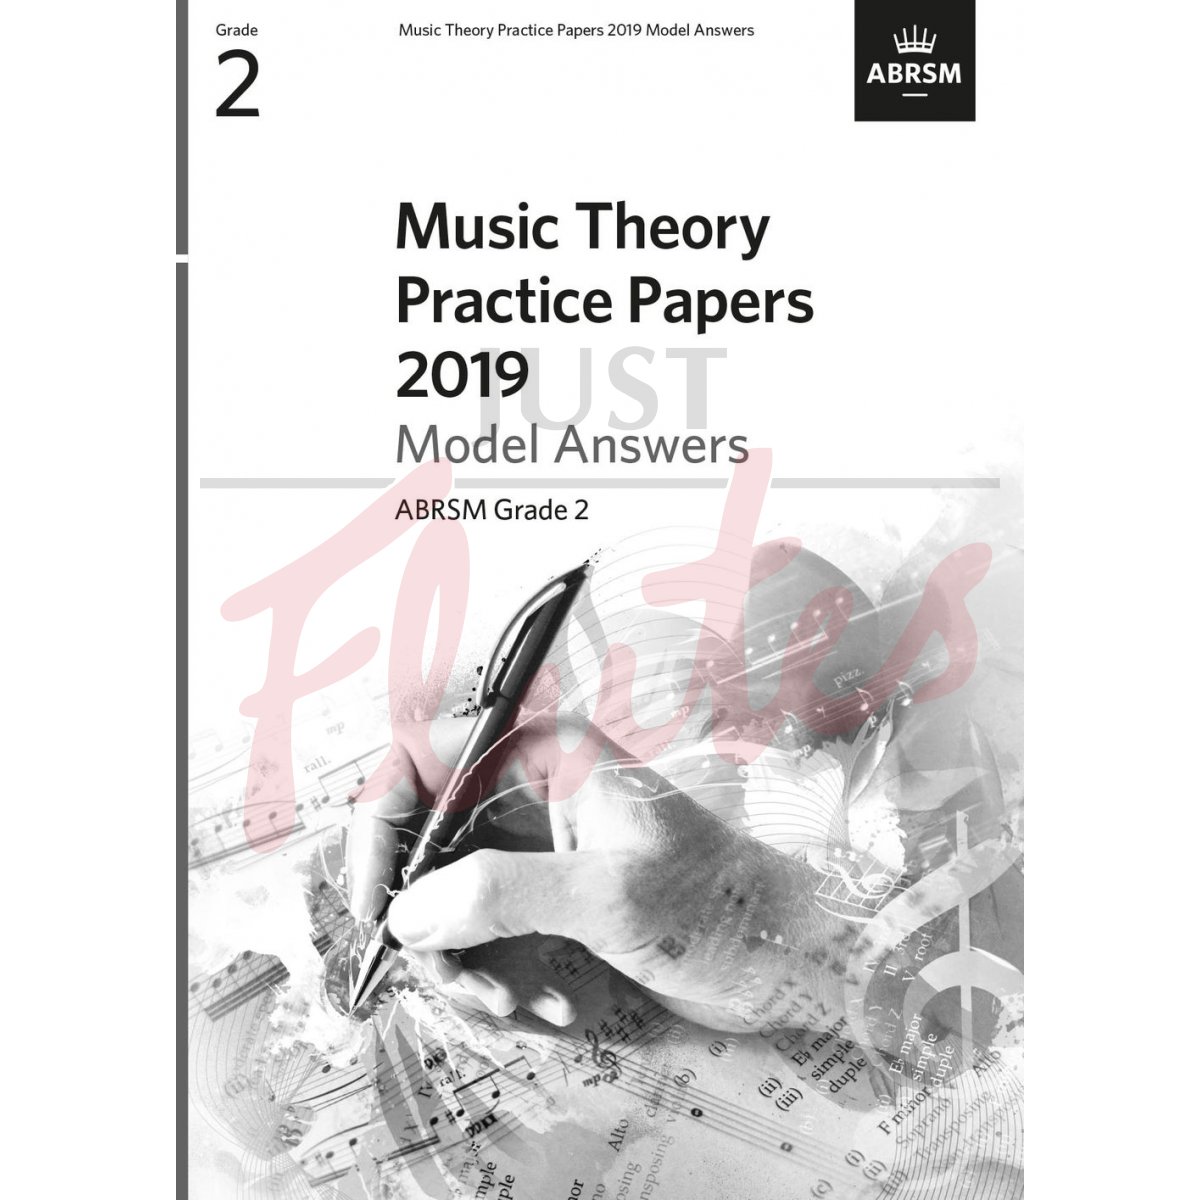 Music Theory Practice Papers 2019 Grade 2 - Model Answers